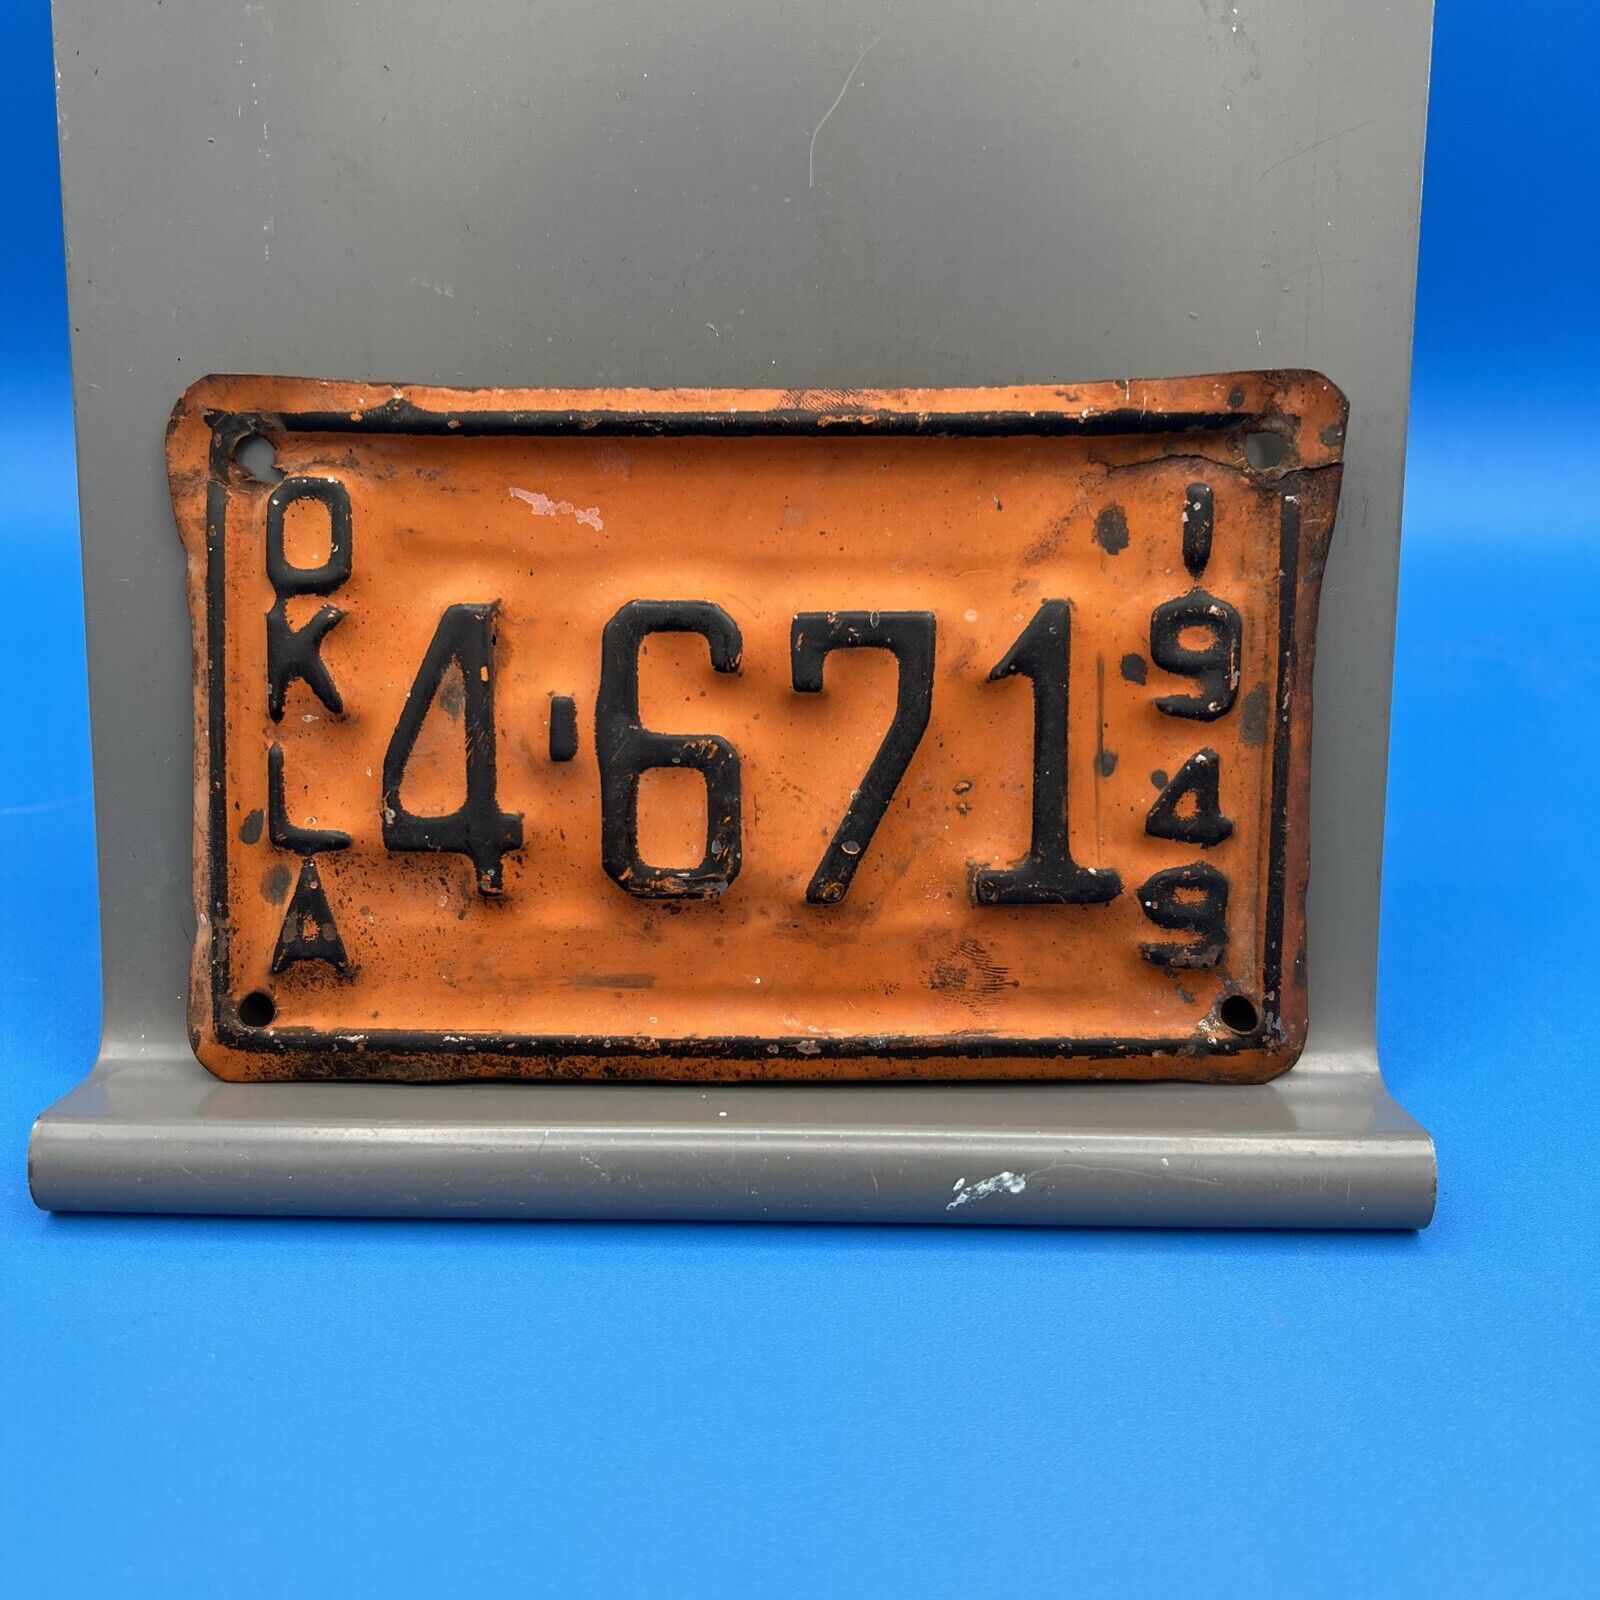 1949 Oklahoma Motorcycle License Plate Tag For Your Classic Harley Or Indian